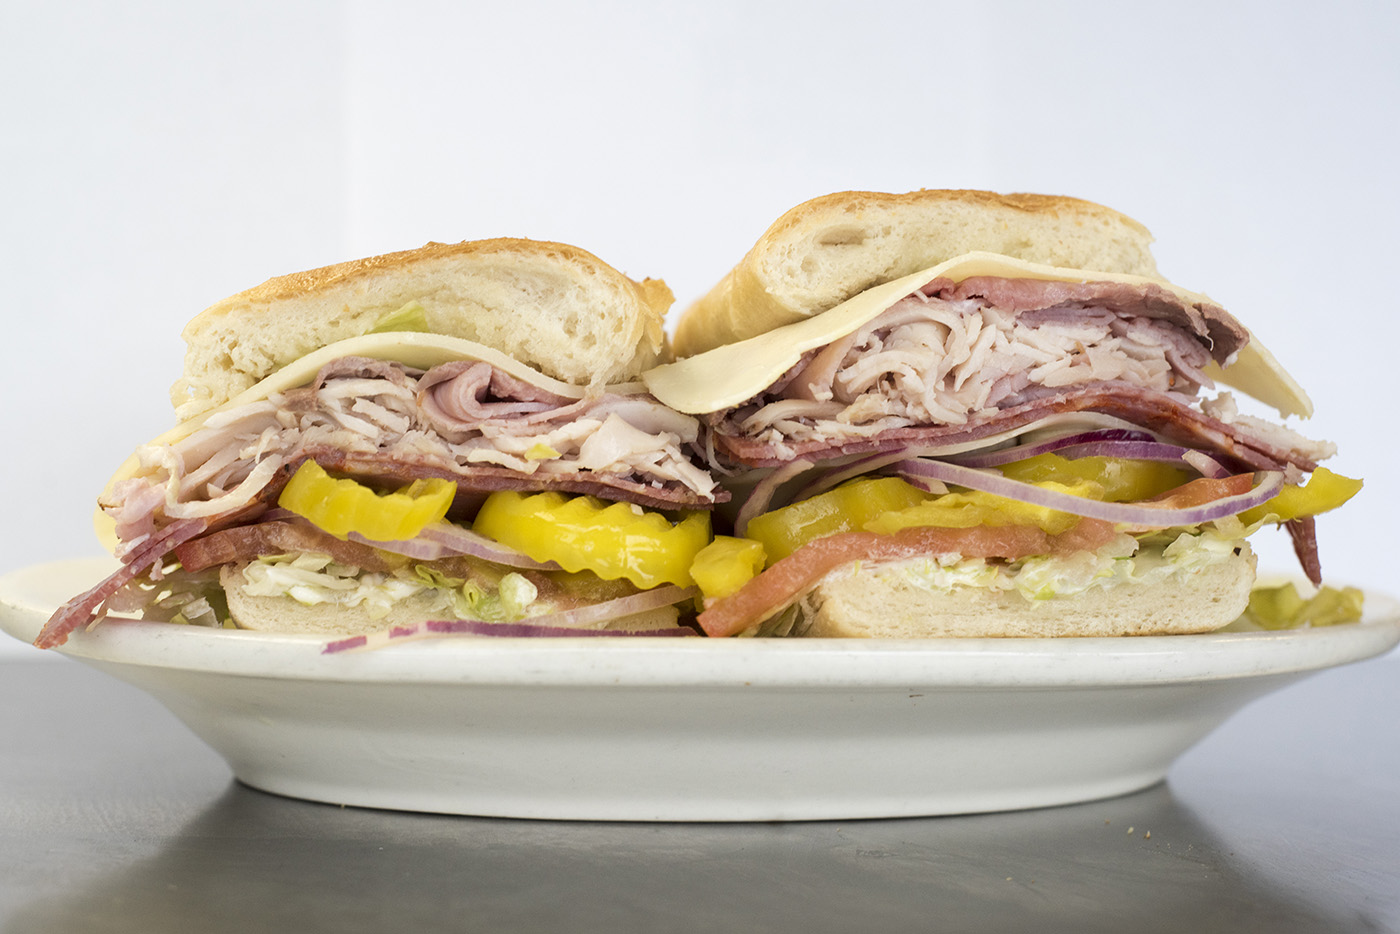 Jonny Cs is a NY style deli located in East Amherst that serves a variety of specialty meats and cold cuts, delicious sandwiches, subs, and more. 